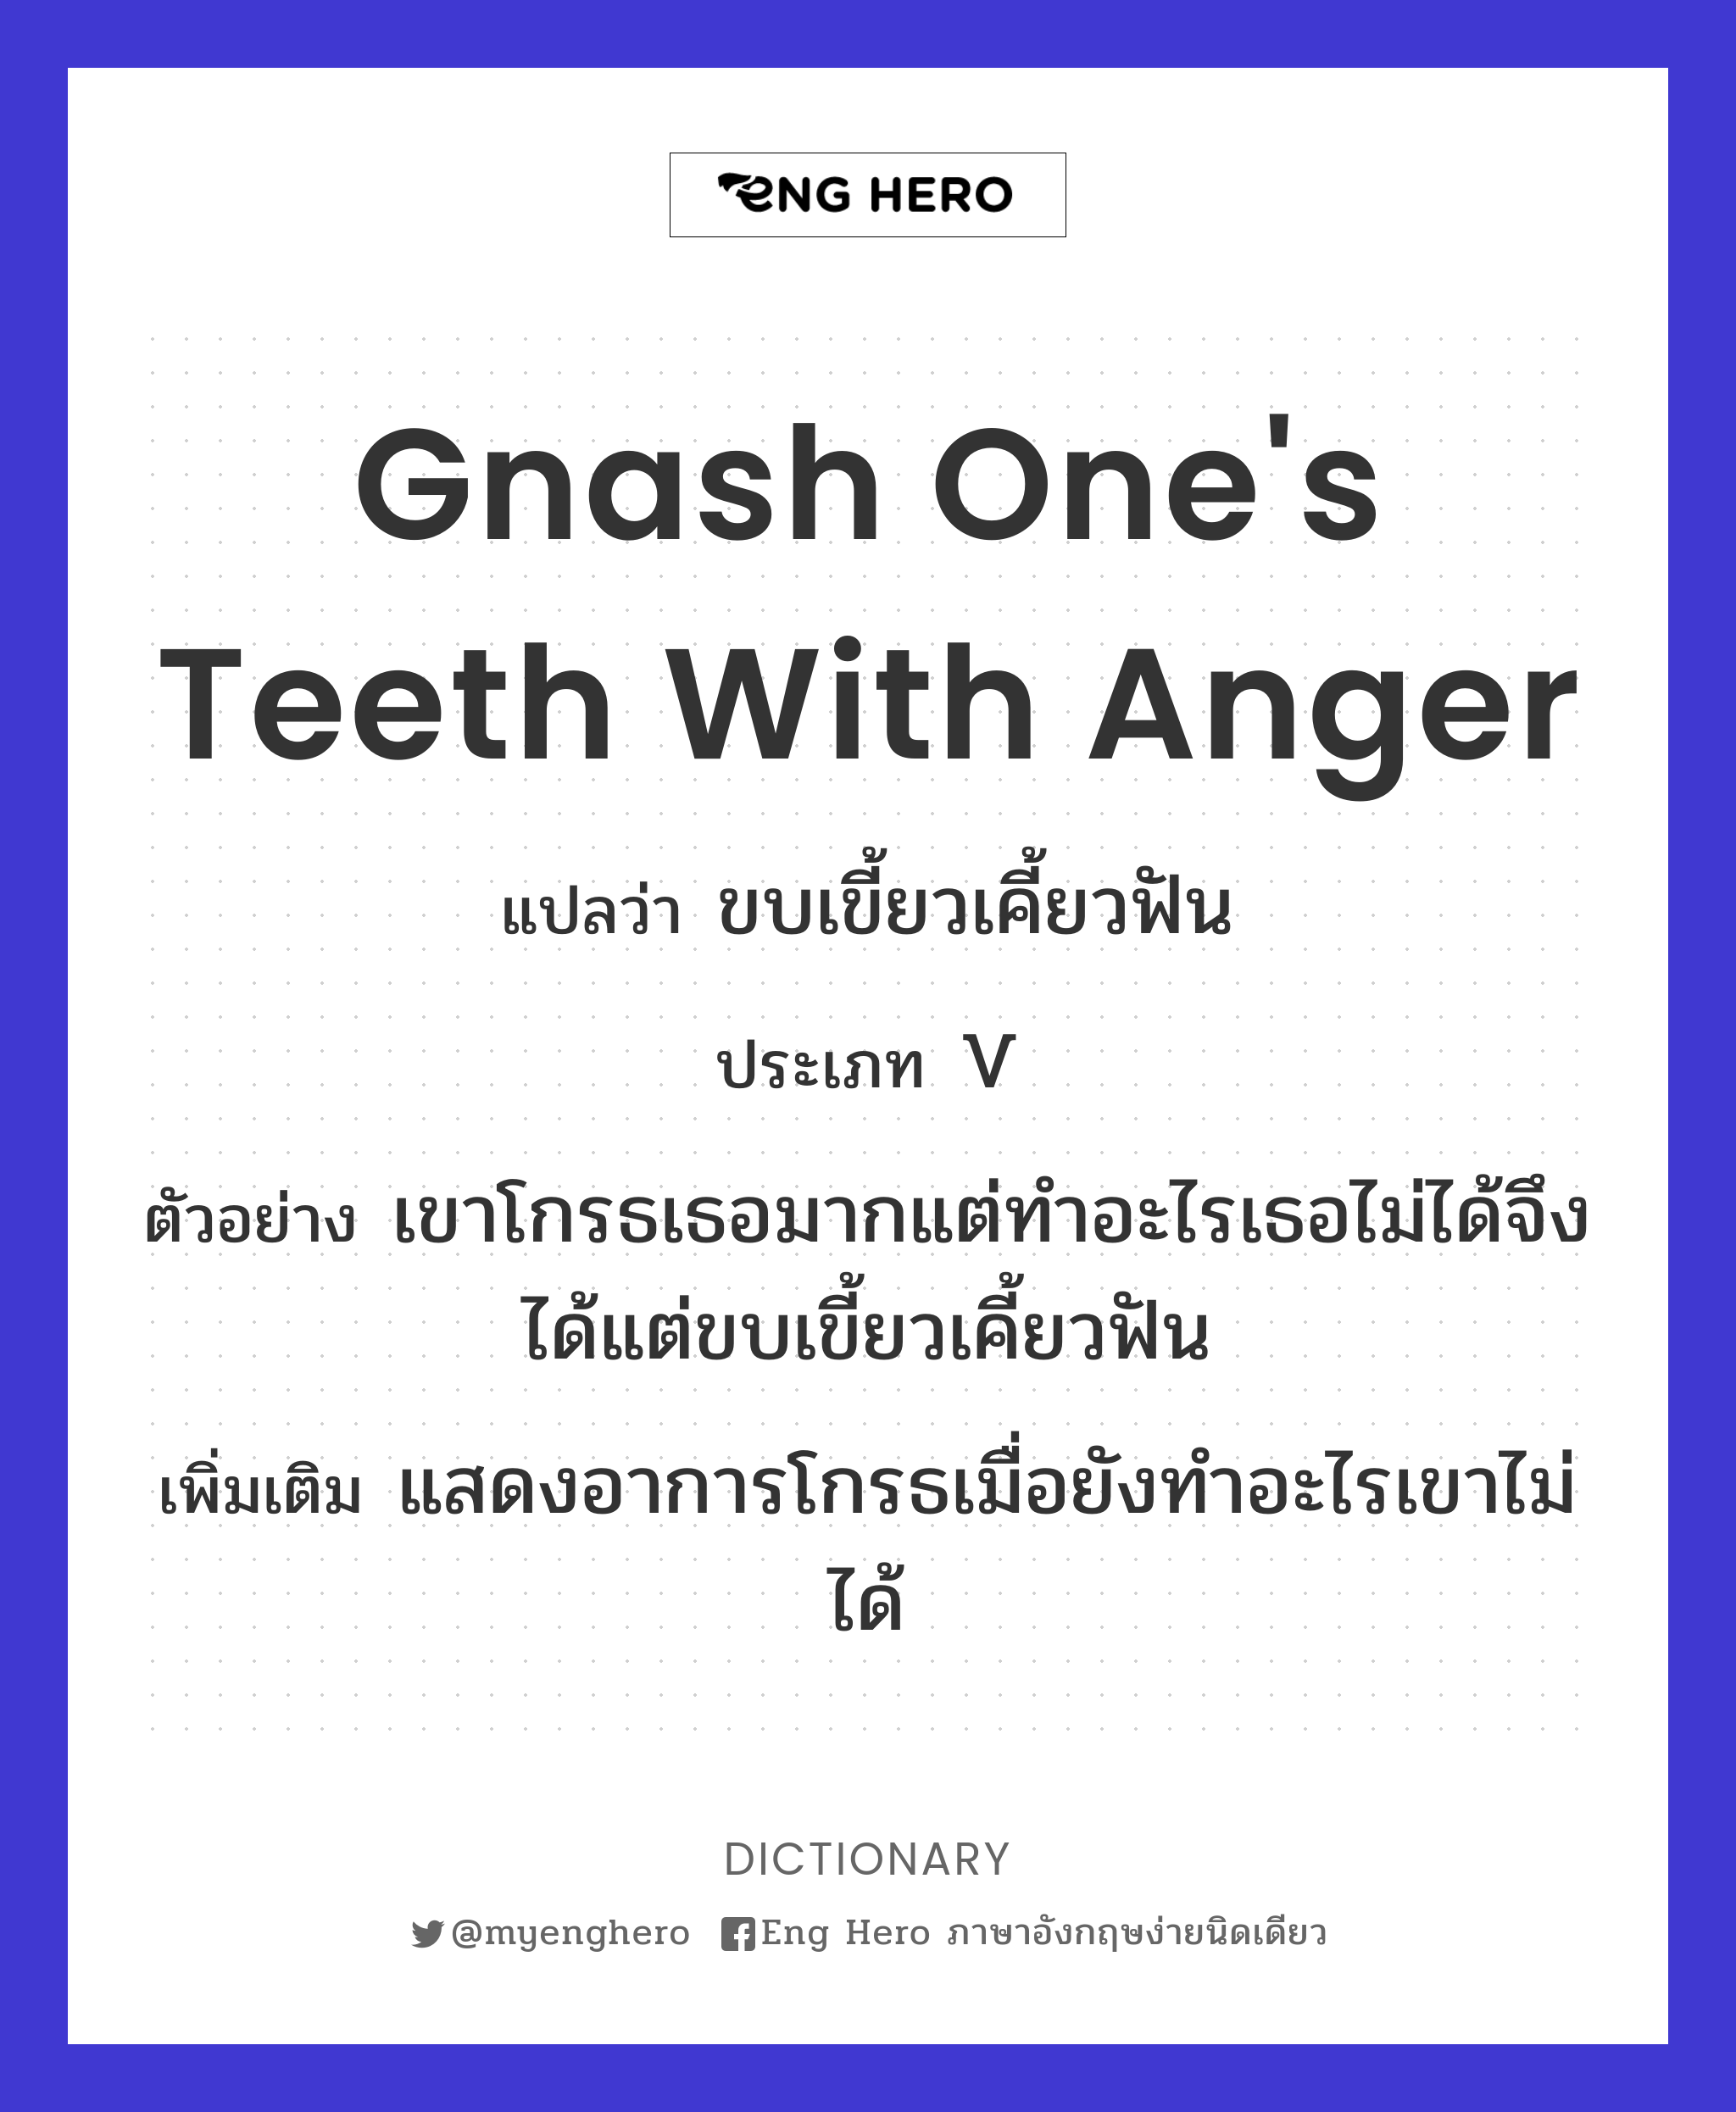 gnash one's teeth with anger